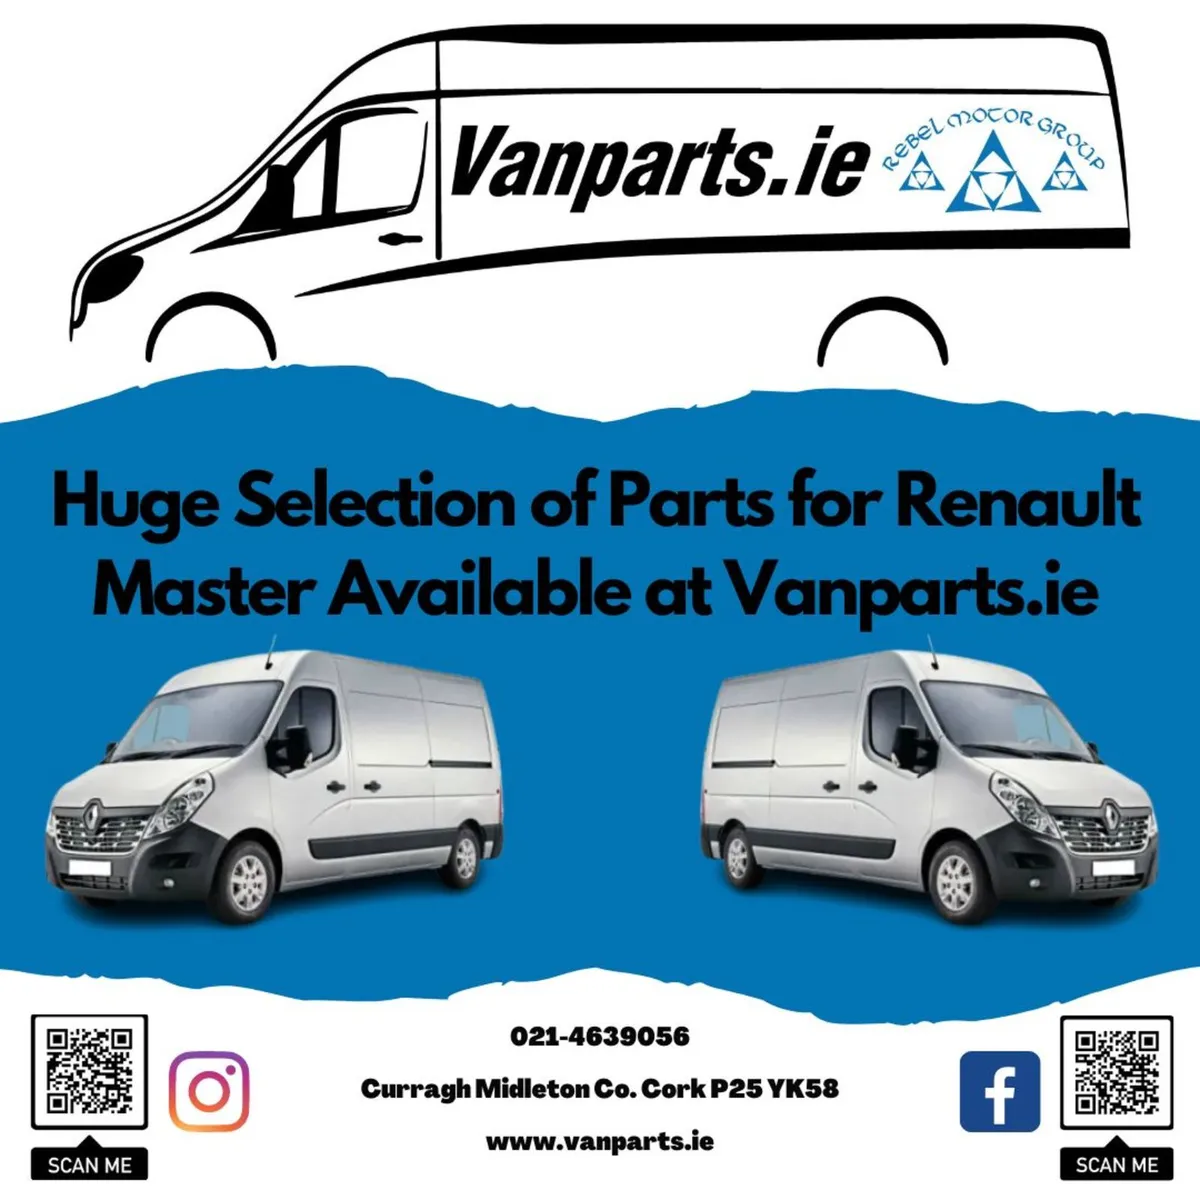 Huge Selection of New Renault Master Parts